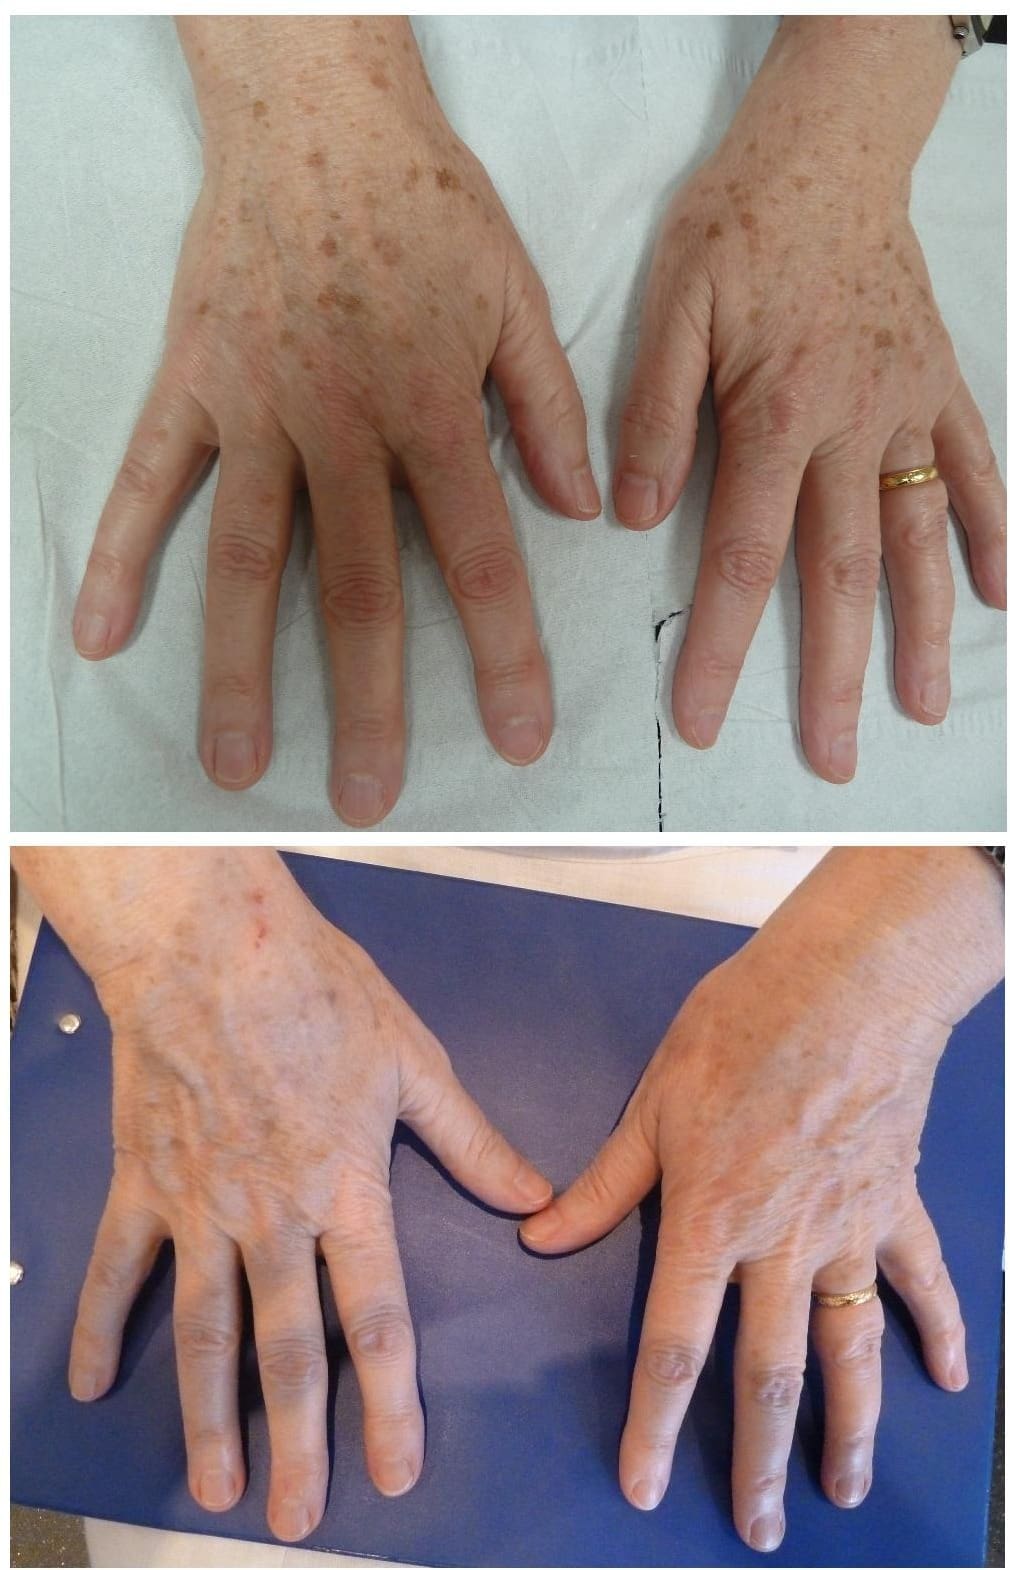 Before and after image of age spot removal after using the polaris 694 Ruby laser